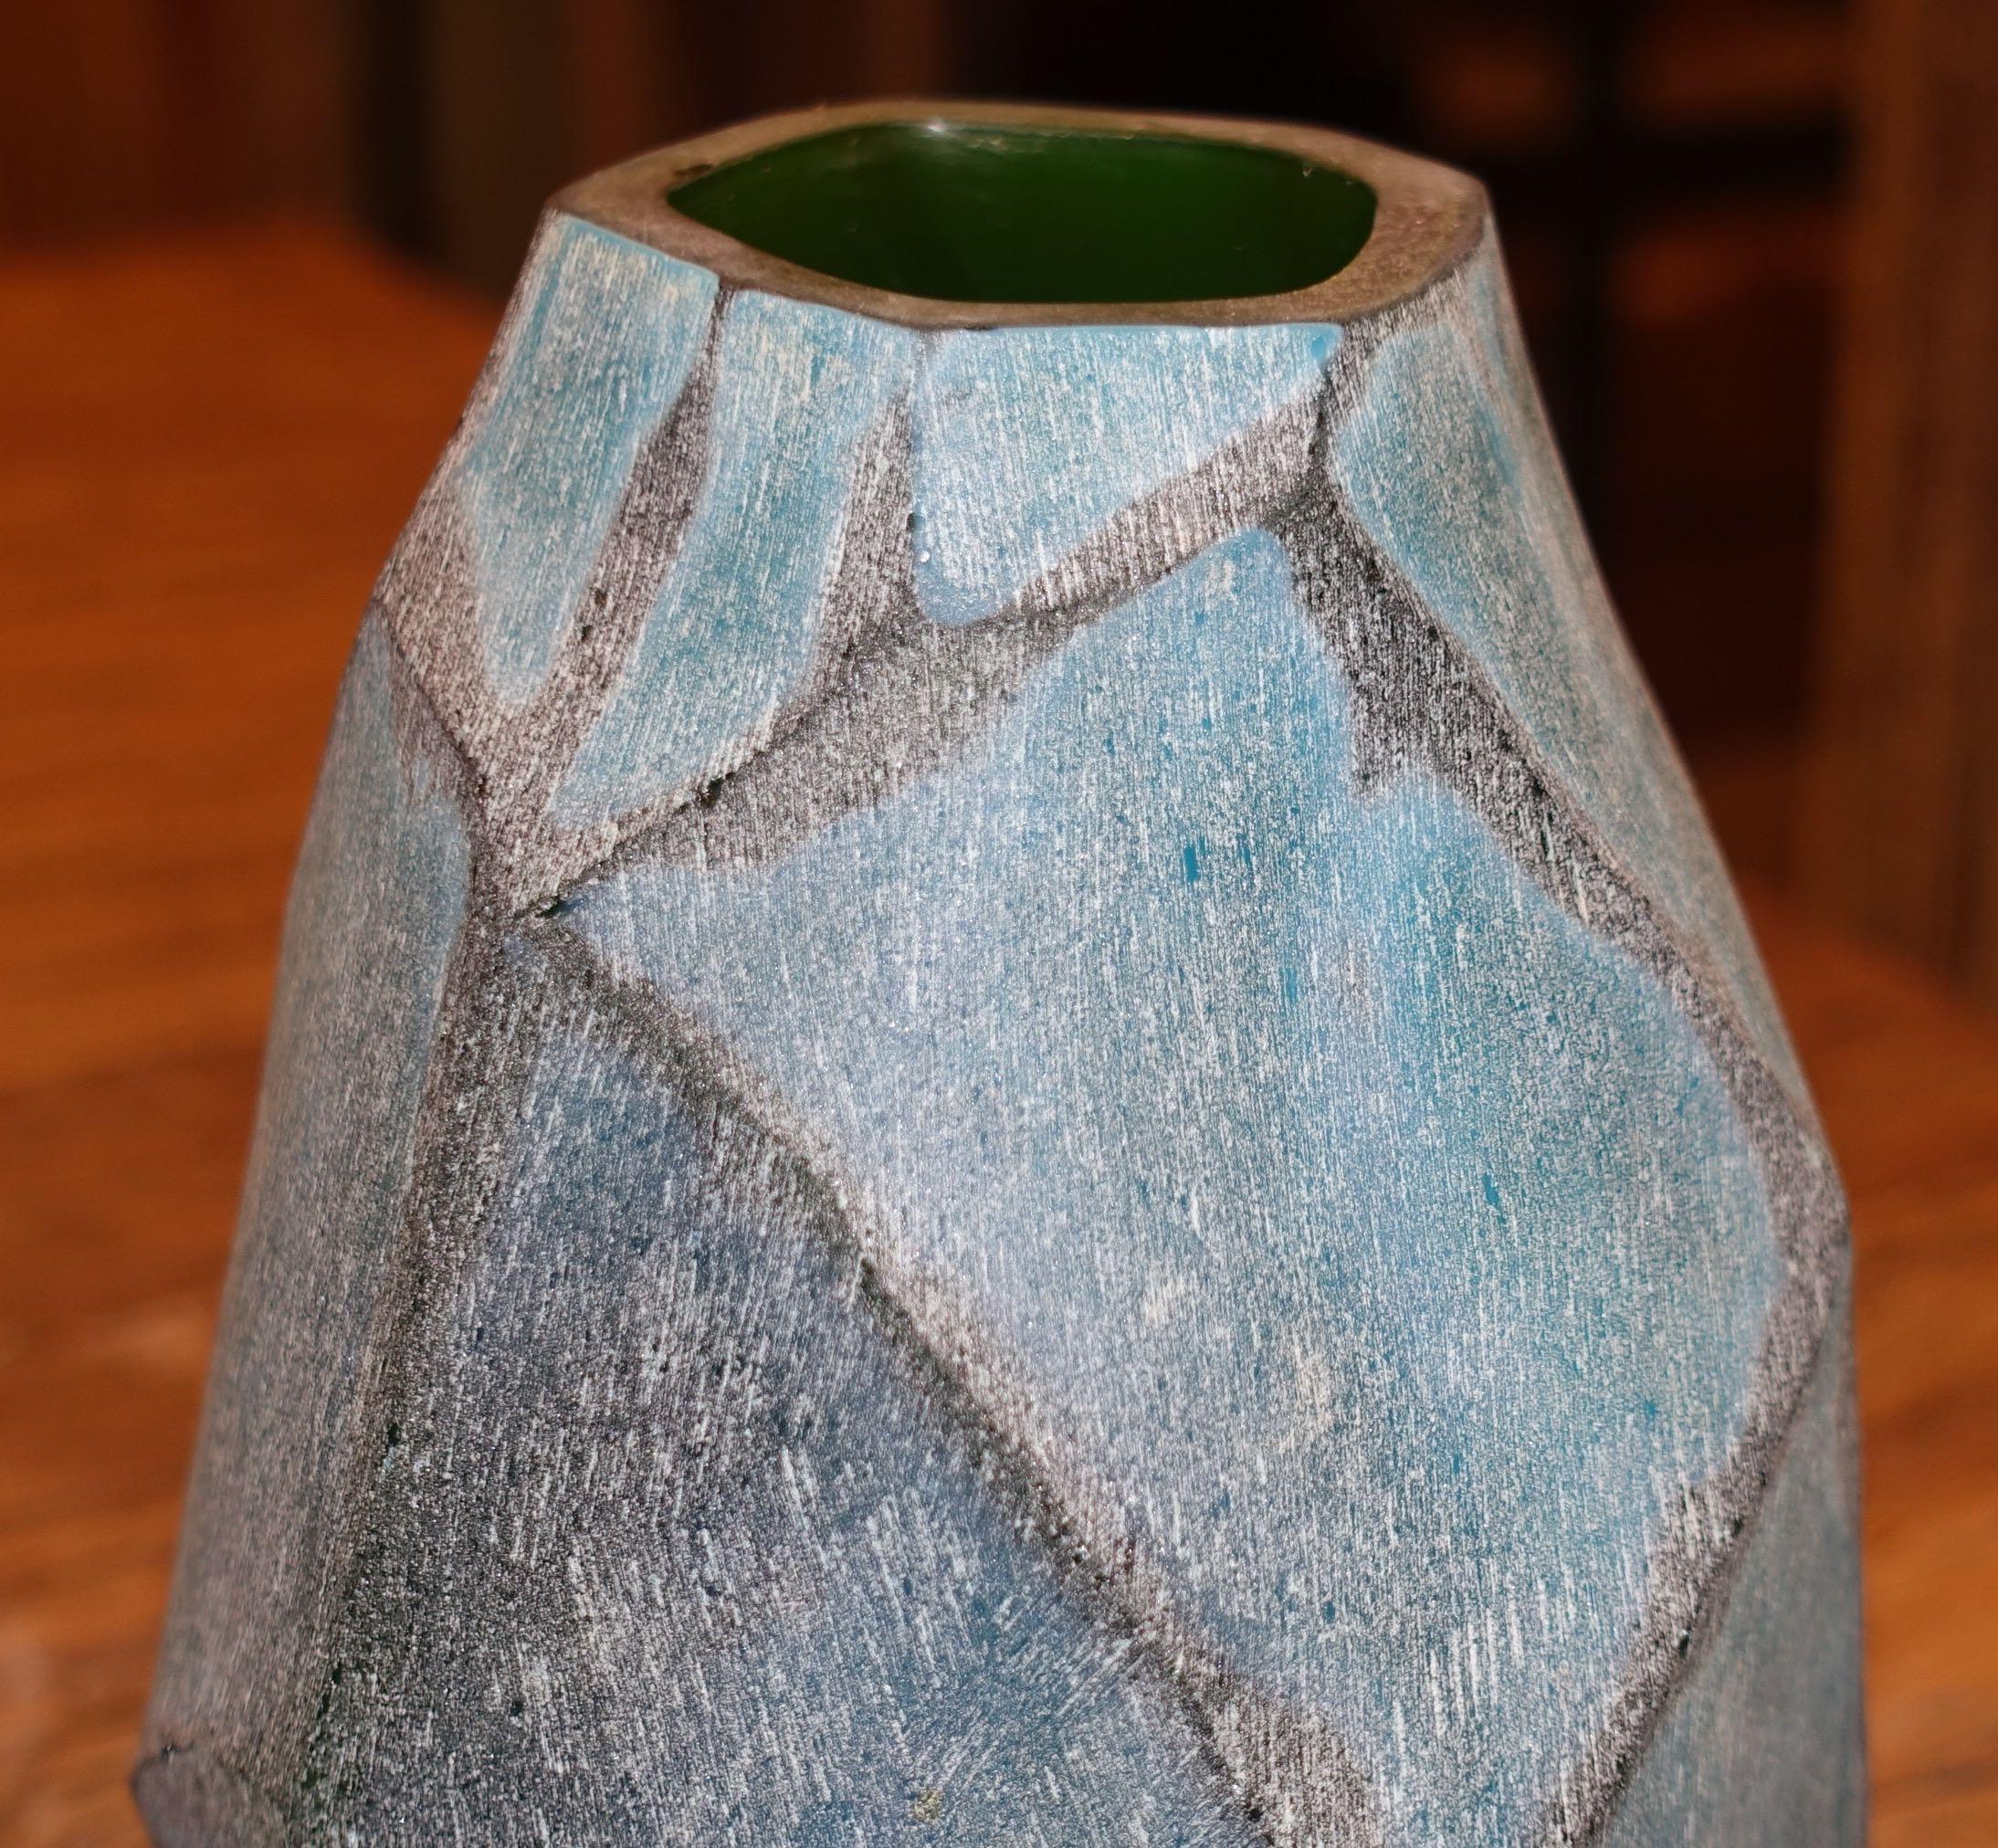 Contemporary Chinese peacock blue glass vase with charcoal grey etched lines.
Frosted finish.
Overall geometric pattern design.
Smaller accompanying style S5213.